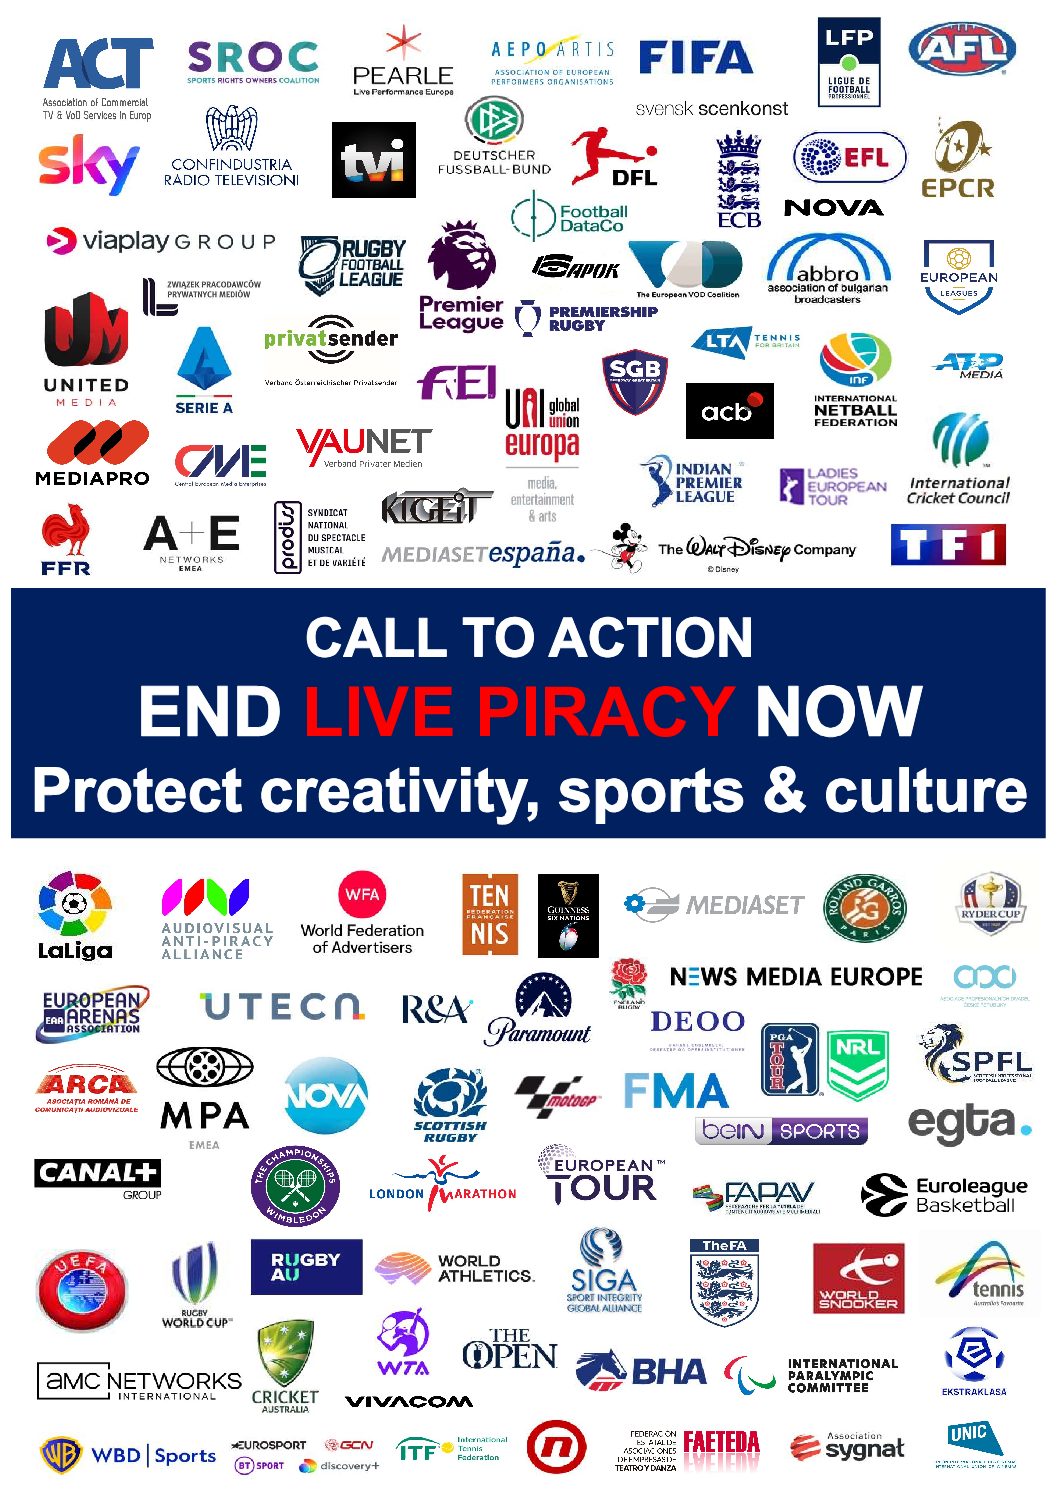 CALL TO ACTION - END LIVE PIRACY NOW     112 organisations across Europe call the European Commission to protect creativity, sports & culture